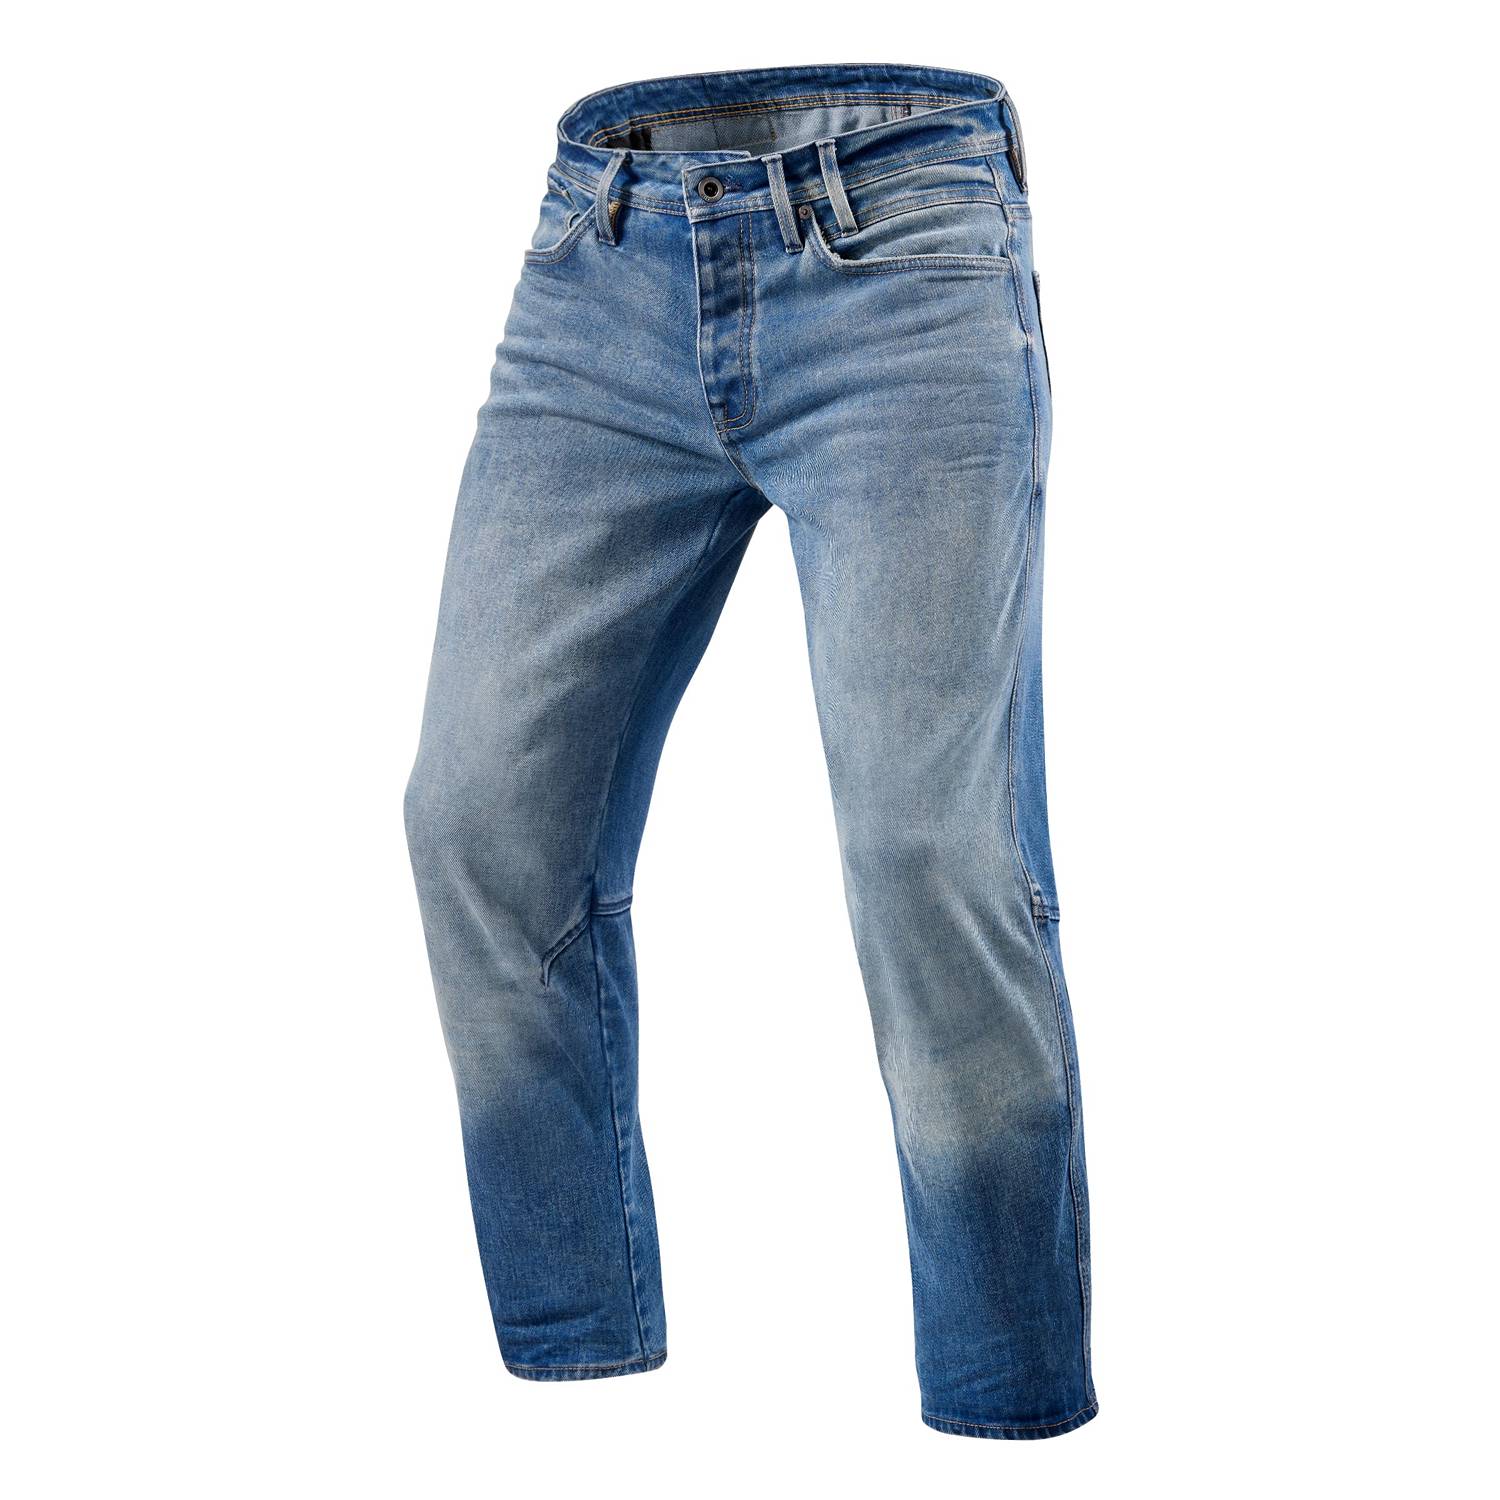 Image of REV'IT! Salt TF Mid Blue Used Motorcycle Jeans Talla L34/W38